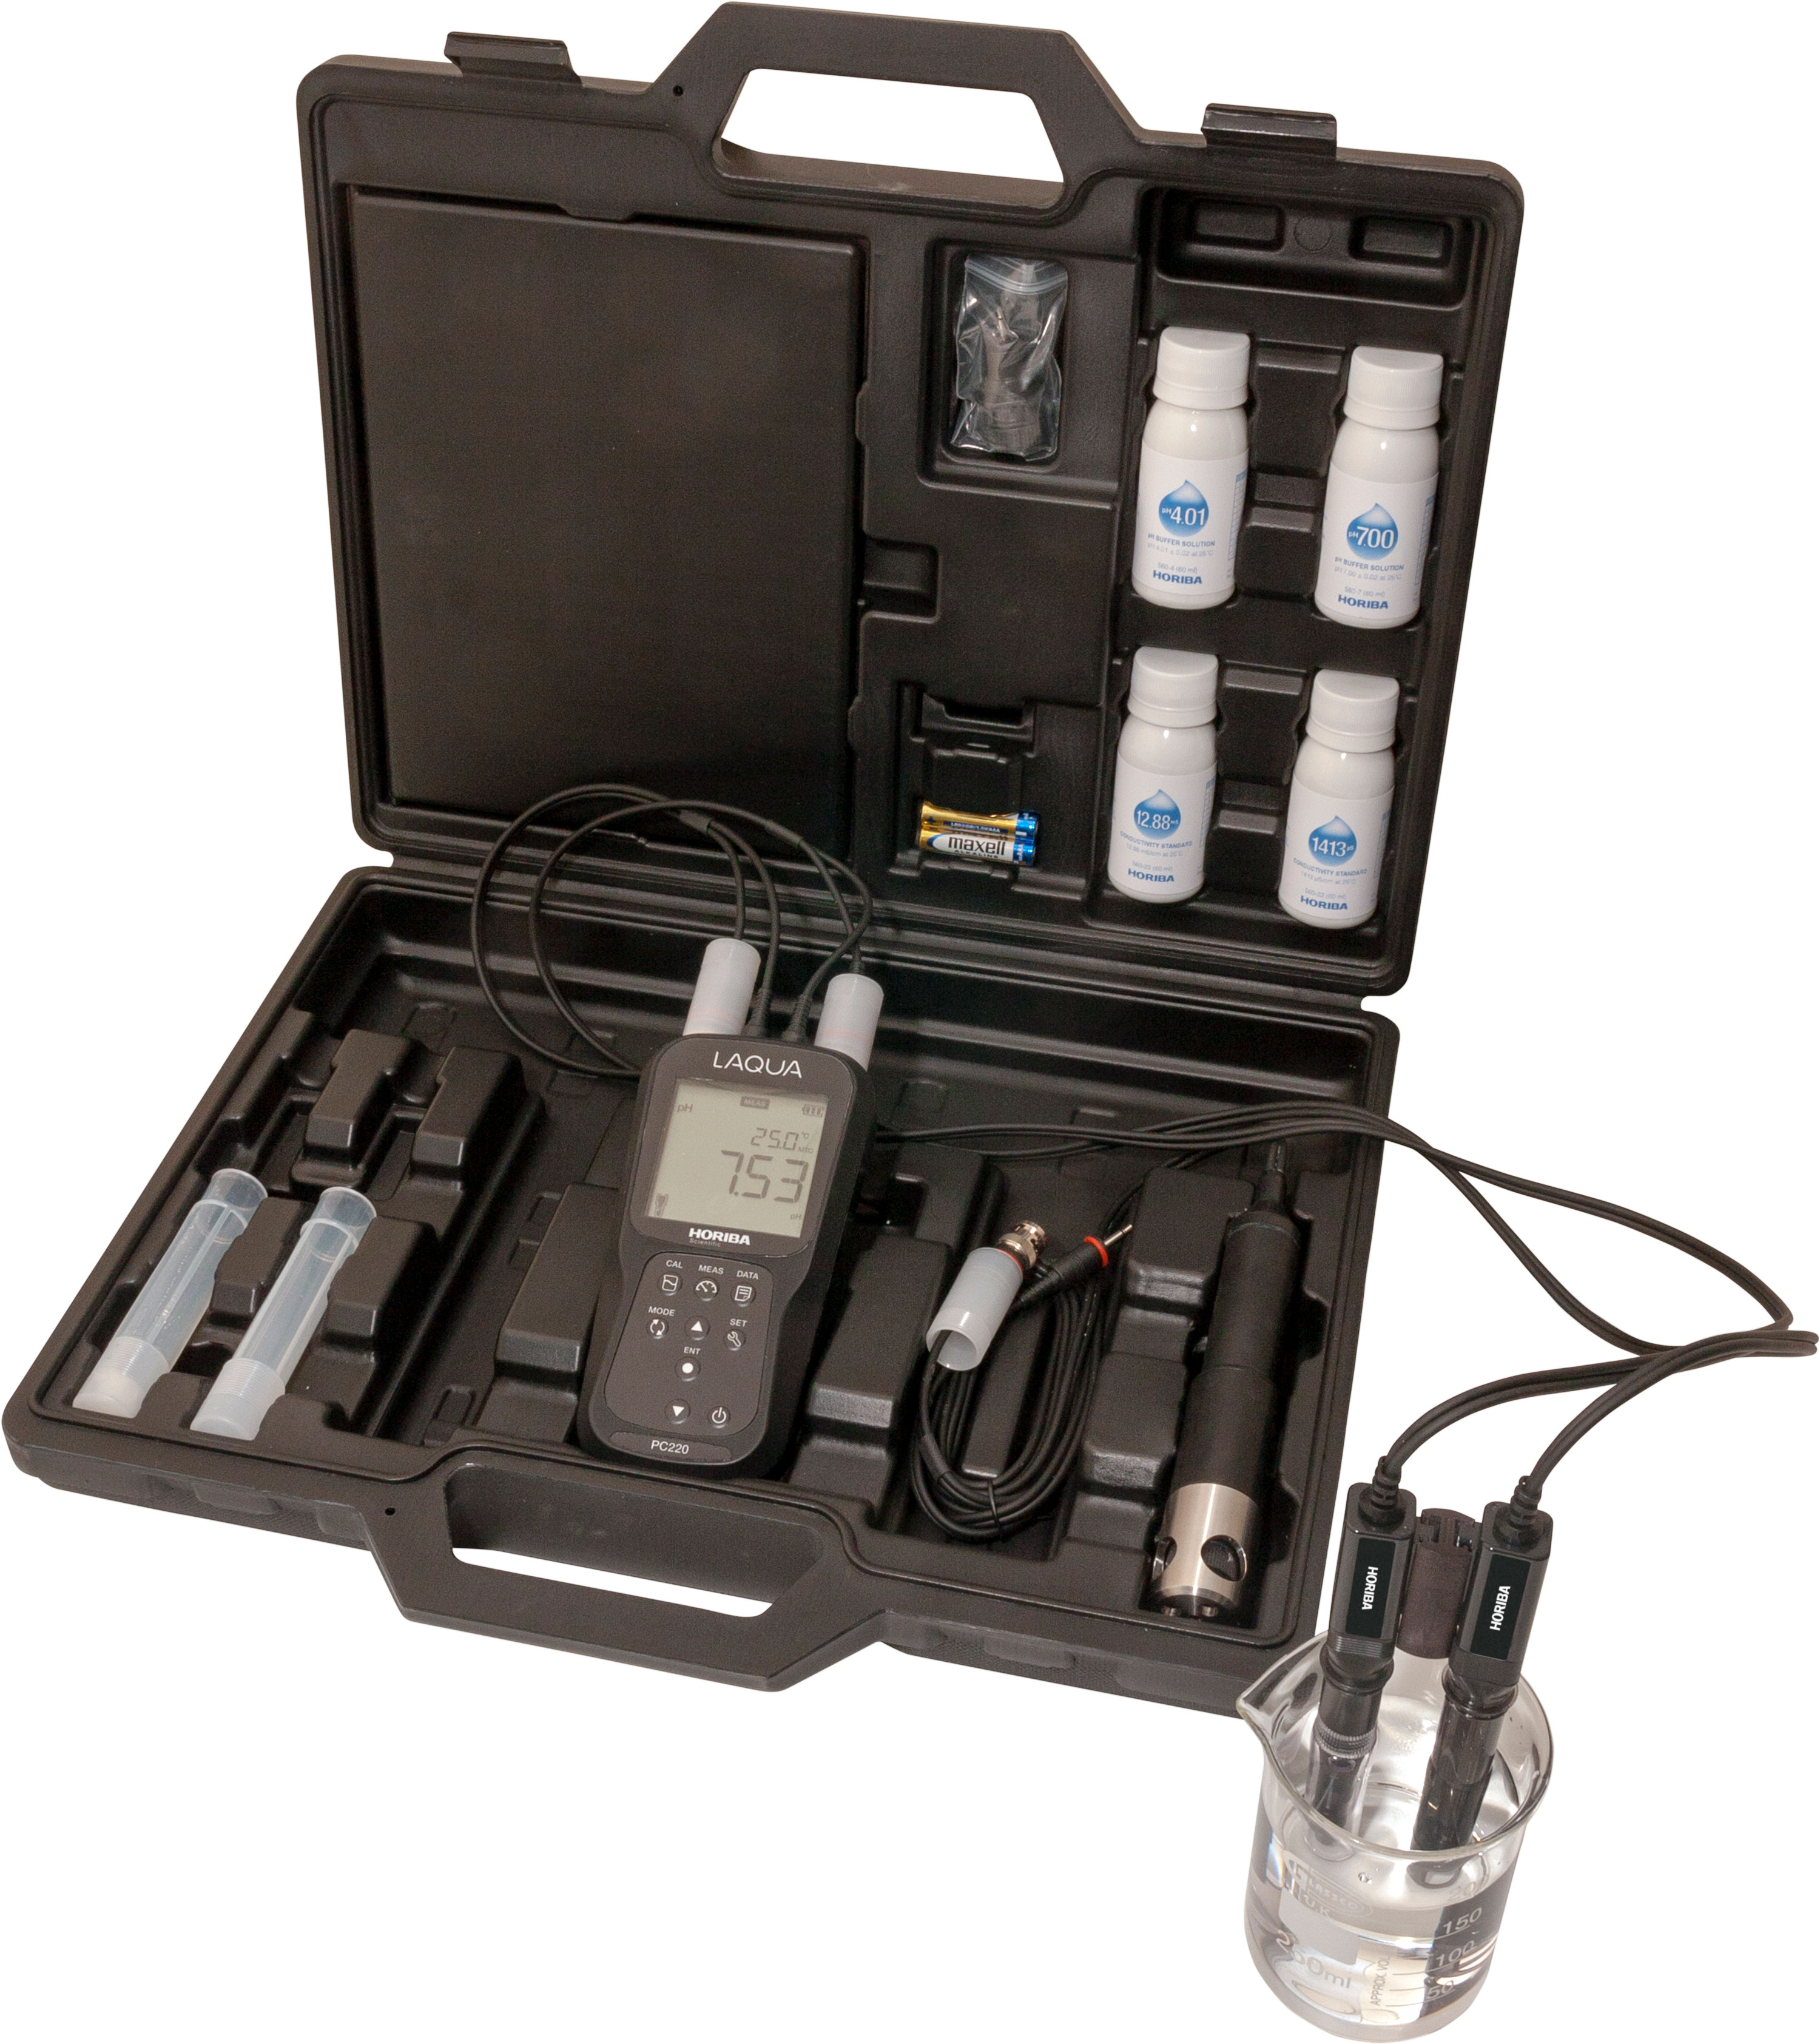 Horiba LAQUA PD210-Kit pH, ORP, Dissolved Oxygen and Temperature hand-held meter in carrying case